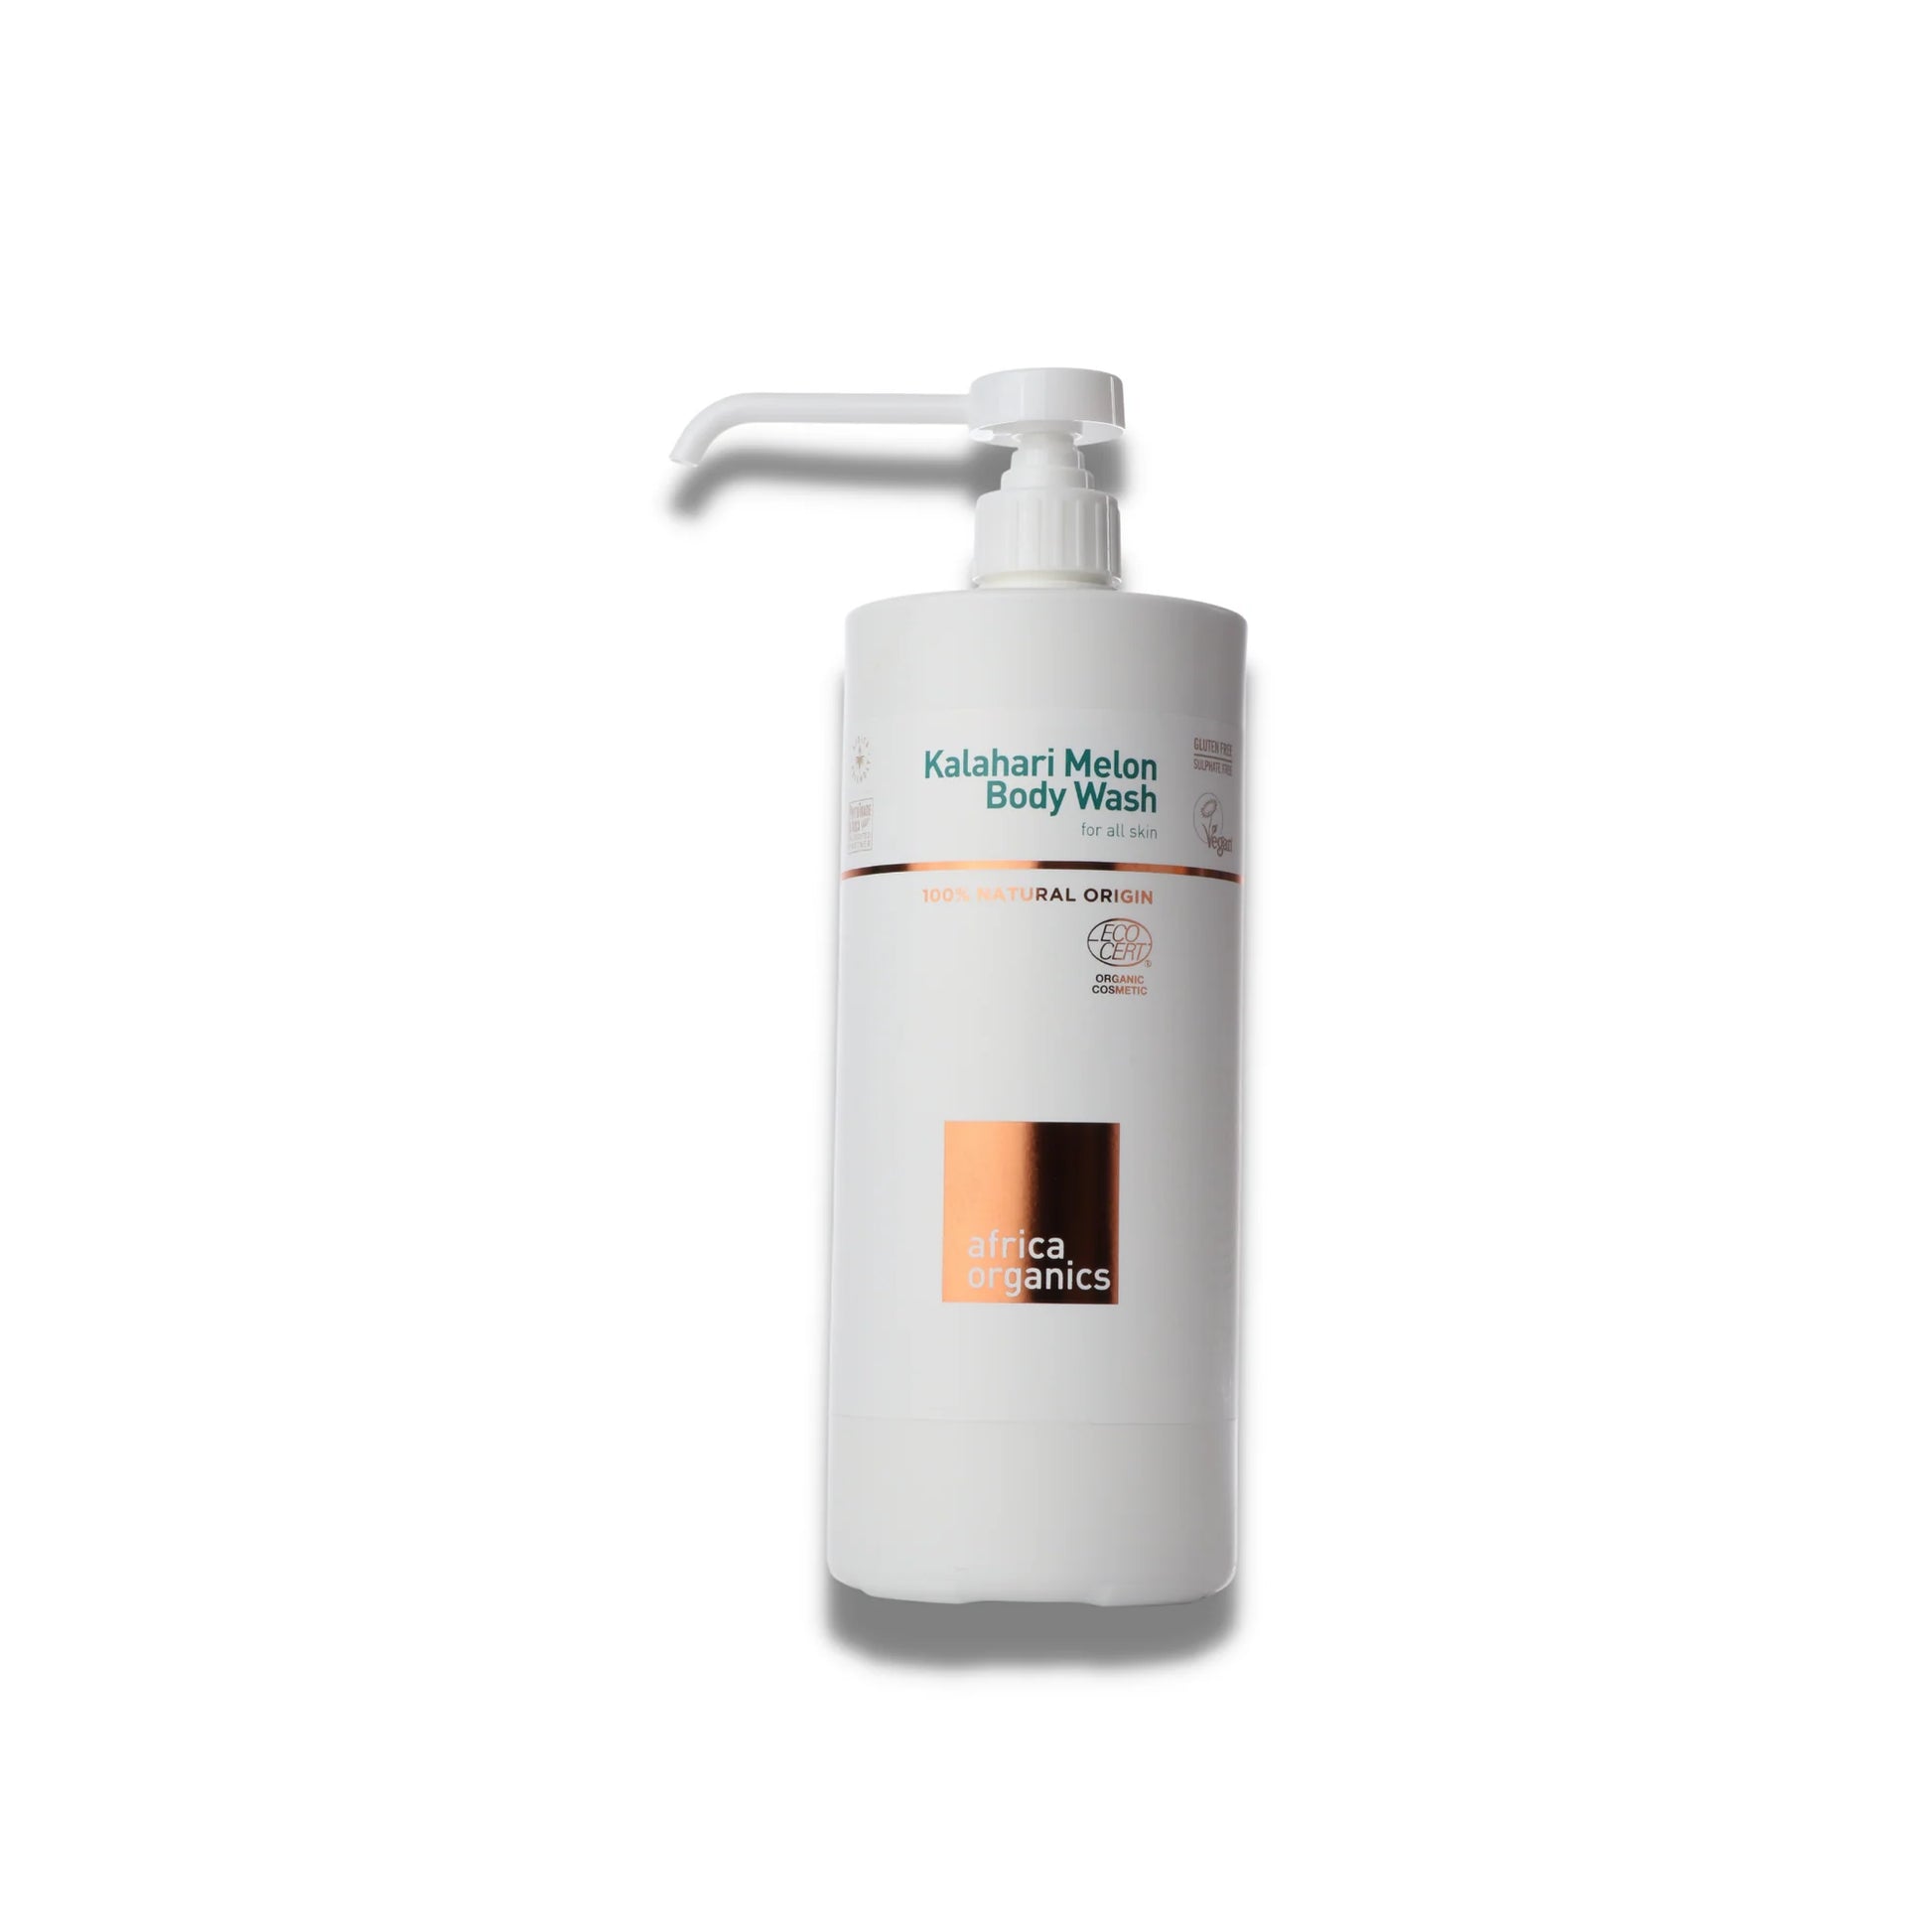 Kalahari Melon body wash, enriched with natural antioxidants for gentle, moisturized skin.